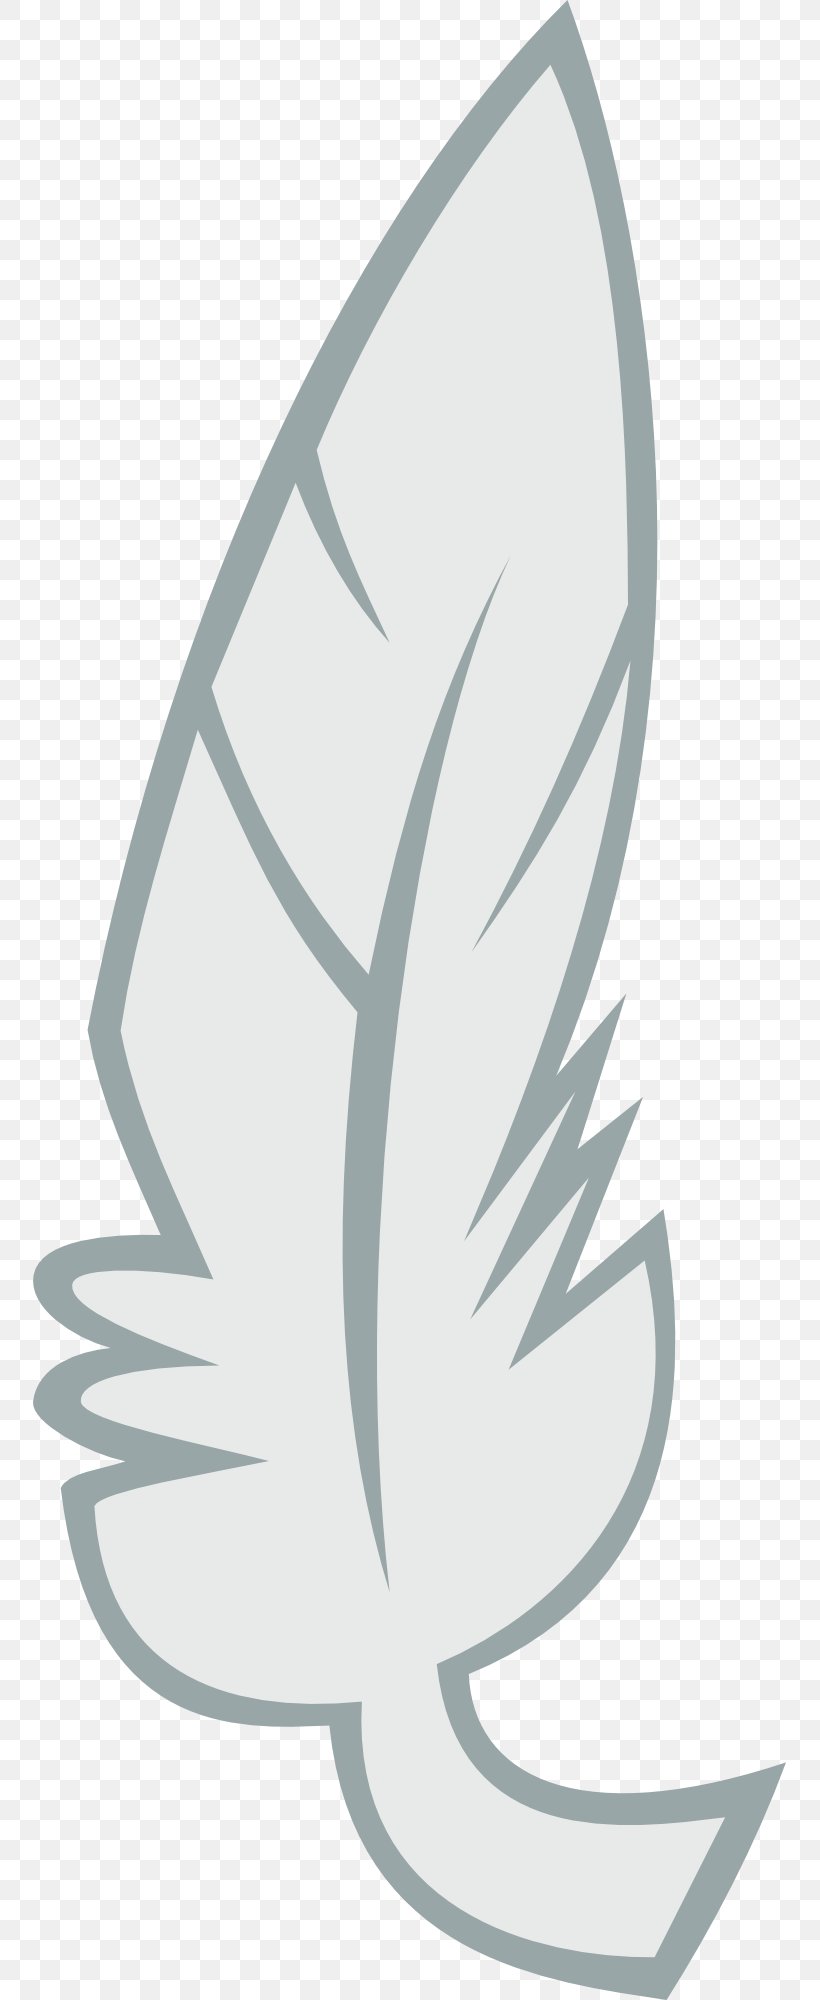 Feather Derpy Hooves Cutie Mark Crusaders Pony Call Of The Cutie, PNG, 753x2000px, Feather, Alula, Call Of The Cutie, Cutie Mark Crusaders, Derpy Hooves Download Free